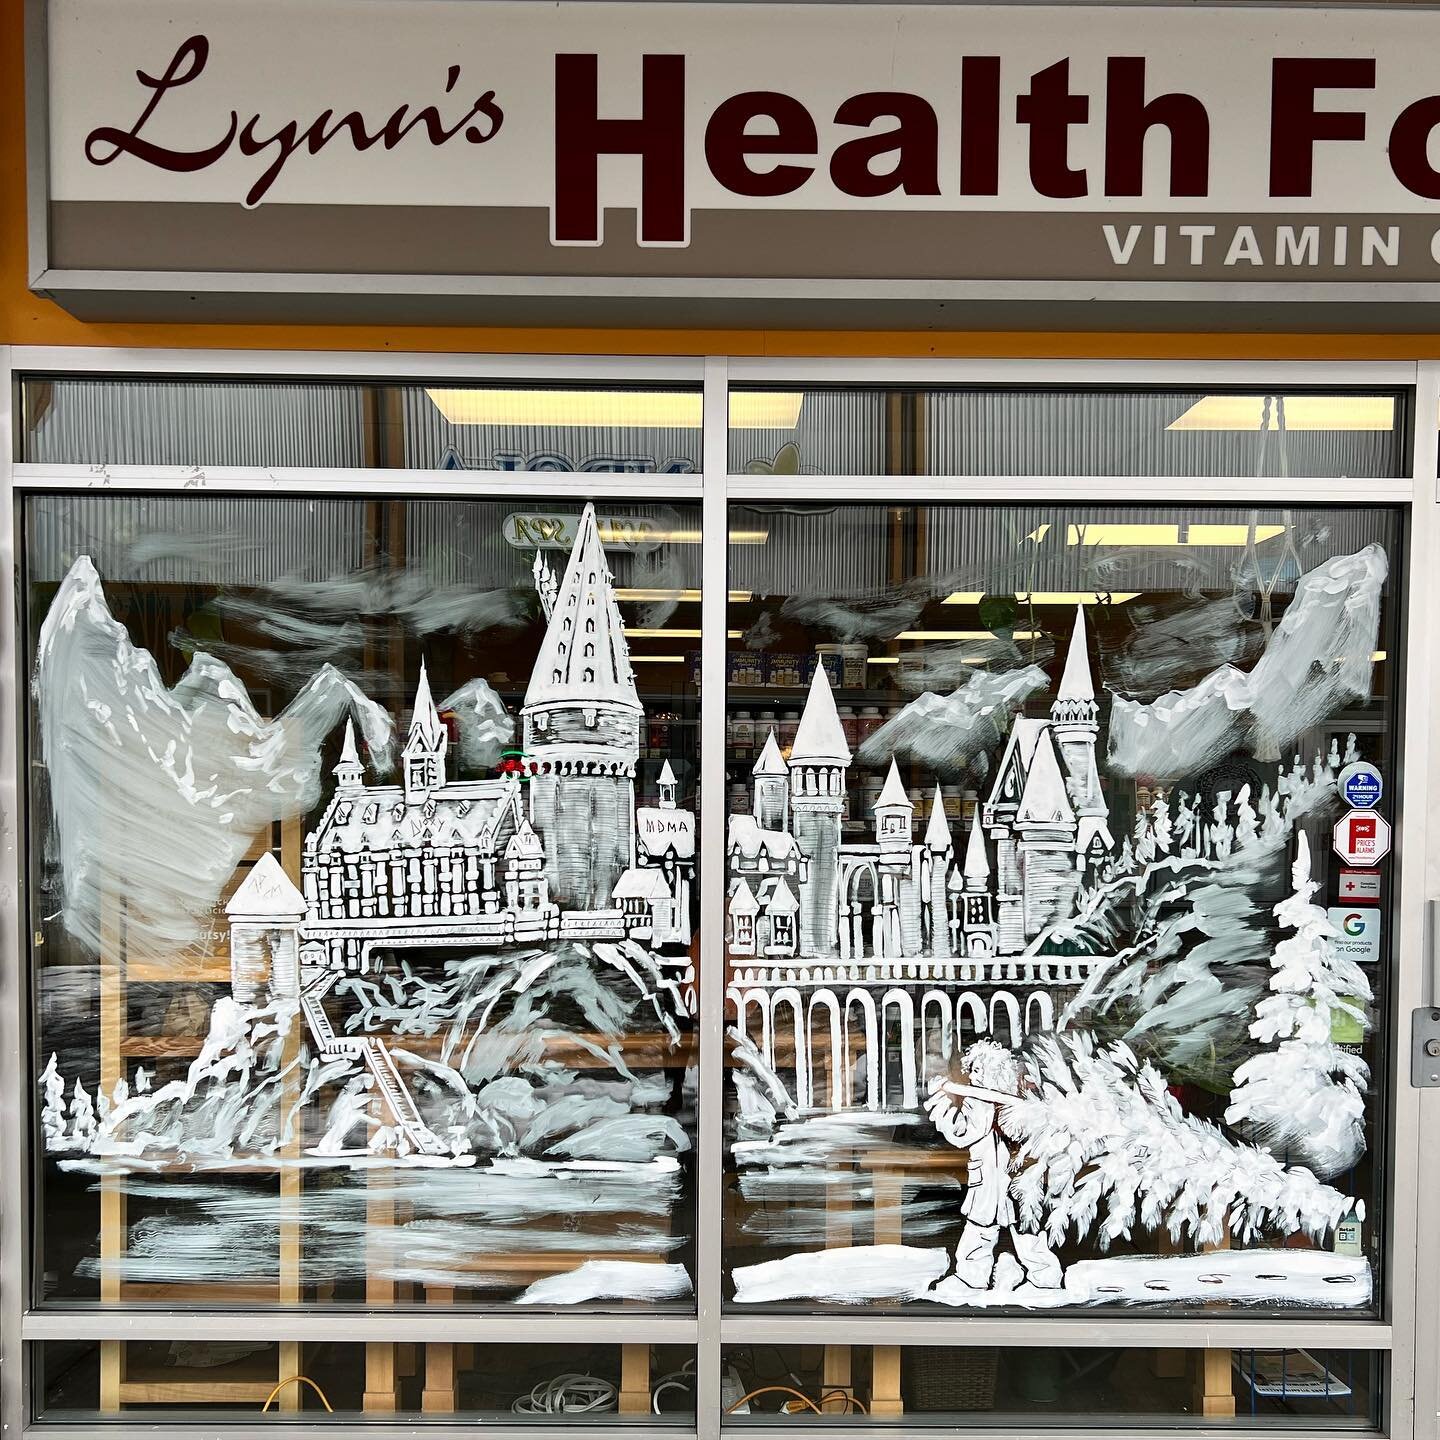 Have you been by to see our Hogwarts Window??? Once again local artist @krisfriesen did a fantastic job!